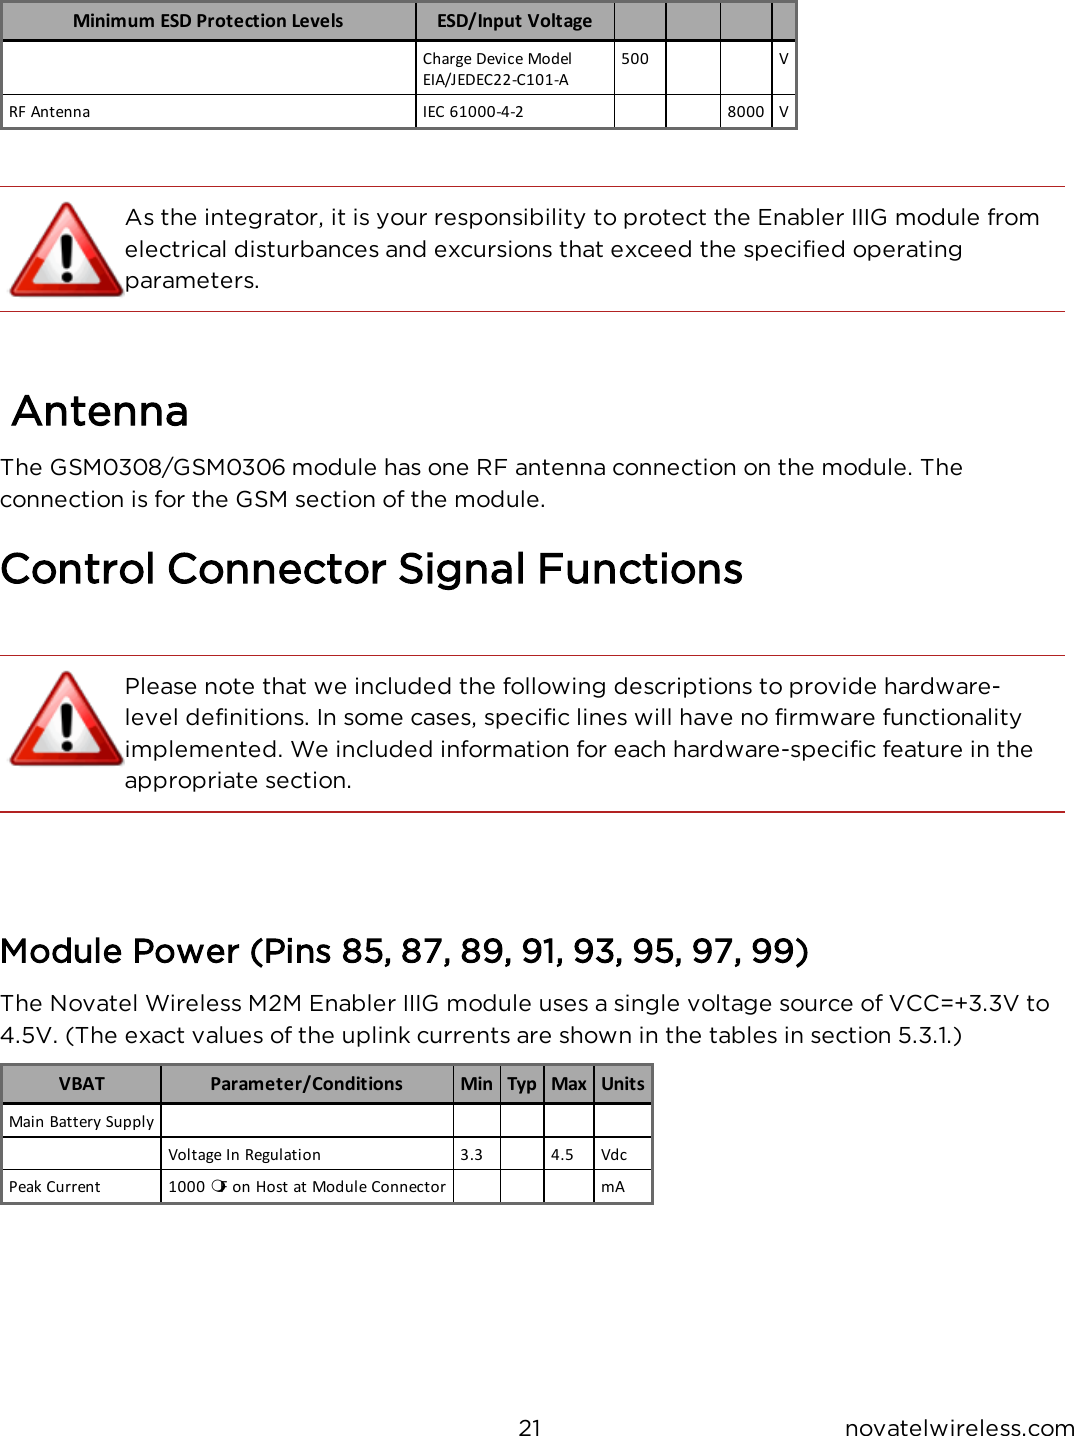 21 novatelwireless.comMinimum ESD Protection Levels ESD/Input Voltage          Charge Device Model EIA/JEDEC22-C101-A500     VRF Antenna IEC 61000-4-2     8000 VAs the integrator, it is your responsibility to protect the Enabler IIIG module from electrical disturbances and excursions that exceed the specified operating parameters. AntennaThe GSM0308/GSM0306 module has one RF antenna connection on the module.  The connection is for the GSM section of the module.Control Connector Signal  FunctionsPlease note that we included the following descriptions to provide hardware-level definitions.  In some cases, specific lines will have no firmware functionality implemented.  We included information for each hardware-specific feature in the appropriate section.Module Power (Pins 85, 87, 89, 91, 93, 95, 97, 99)The Novatel Wireless M2M Enabler IIIG module uses a single voltage source of VCC=+3.3V to 4.5V.  (The exact values of the uplink currents are shown in the tables in section 5.3.1.)VBAT Parameter/Conditions Min Typ Max UnitsMain Battery Supply            Voltage In Regulation 3.3   4.5 VdcPeak Current 1000 mF on Host at Module Connector       mA